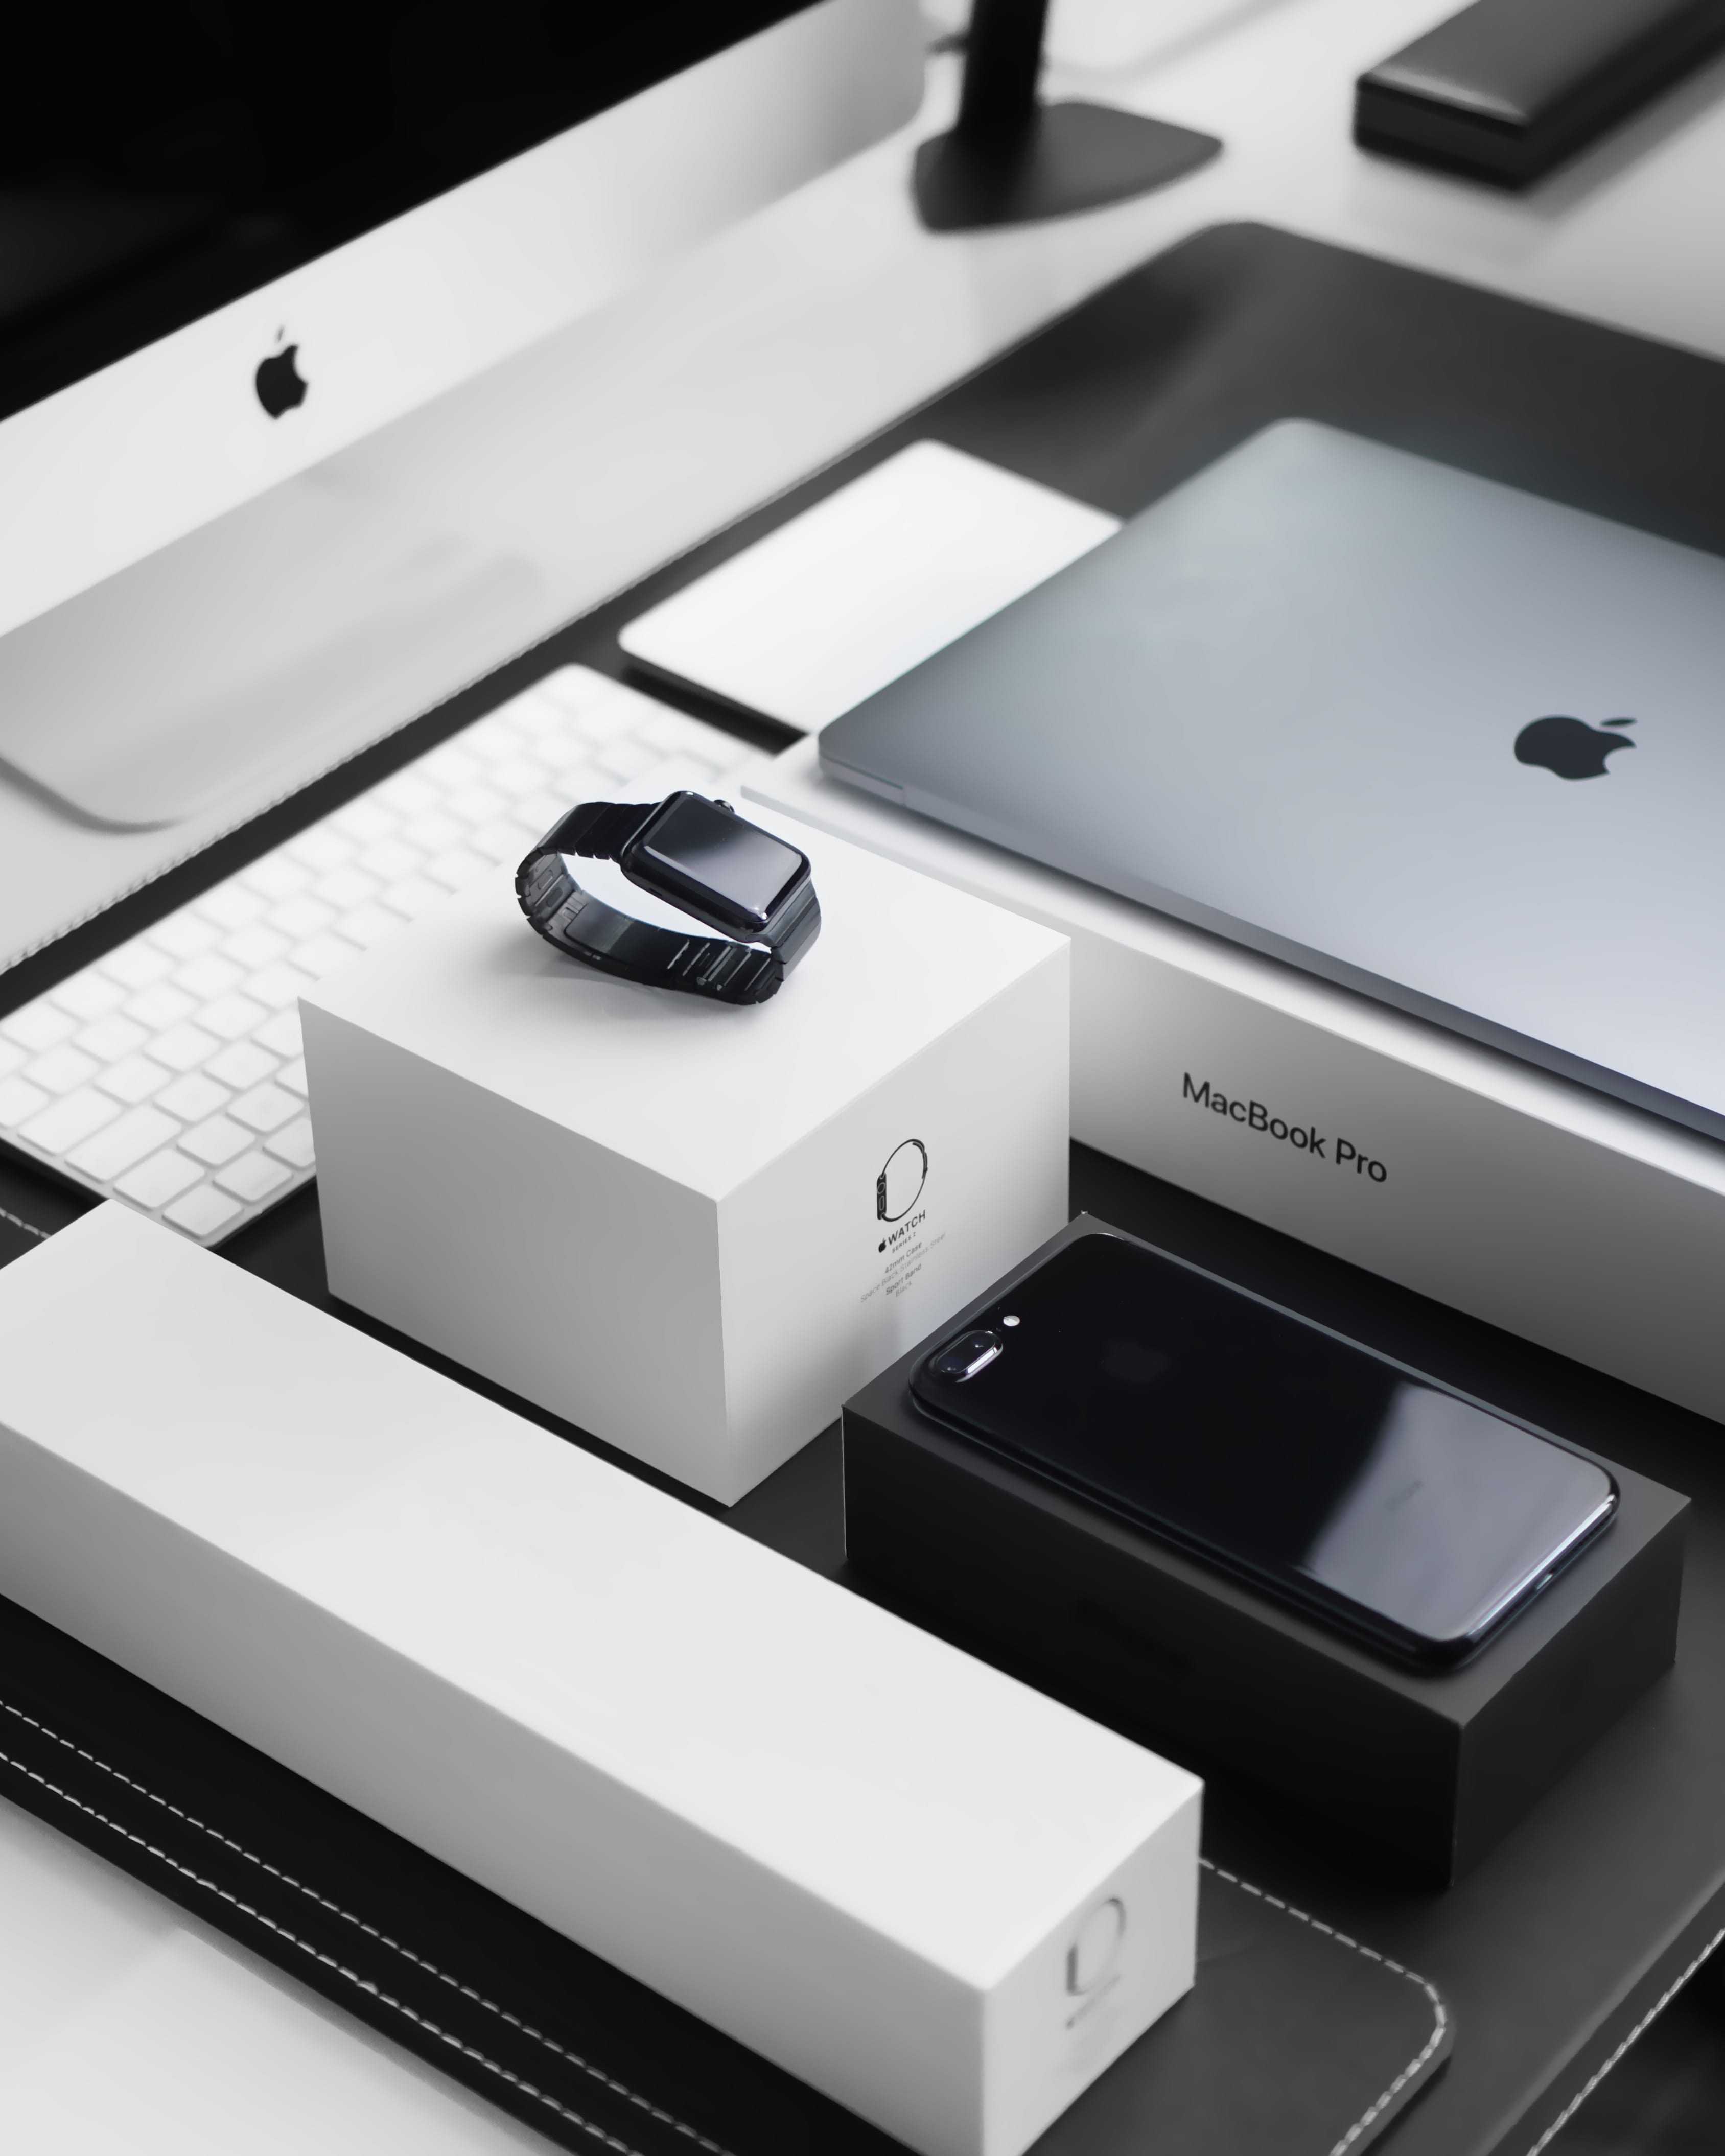 Space black case Apple Watch, silver MacBook Pro, jet black iPhone 7 Plus, and silver iMac with corresponding boxes; image by Julian O’Hayon, via Unsplash.com.